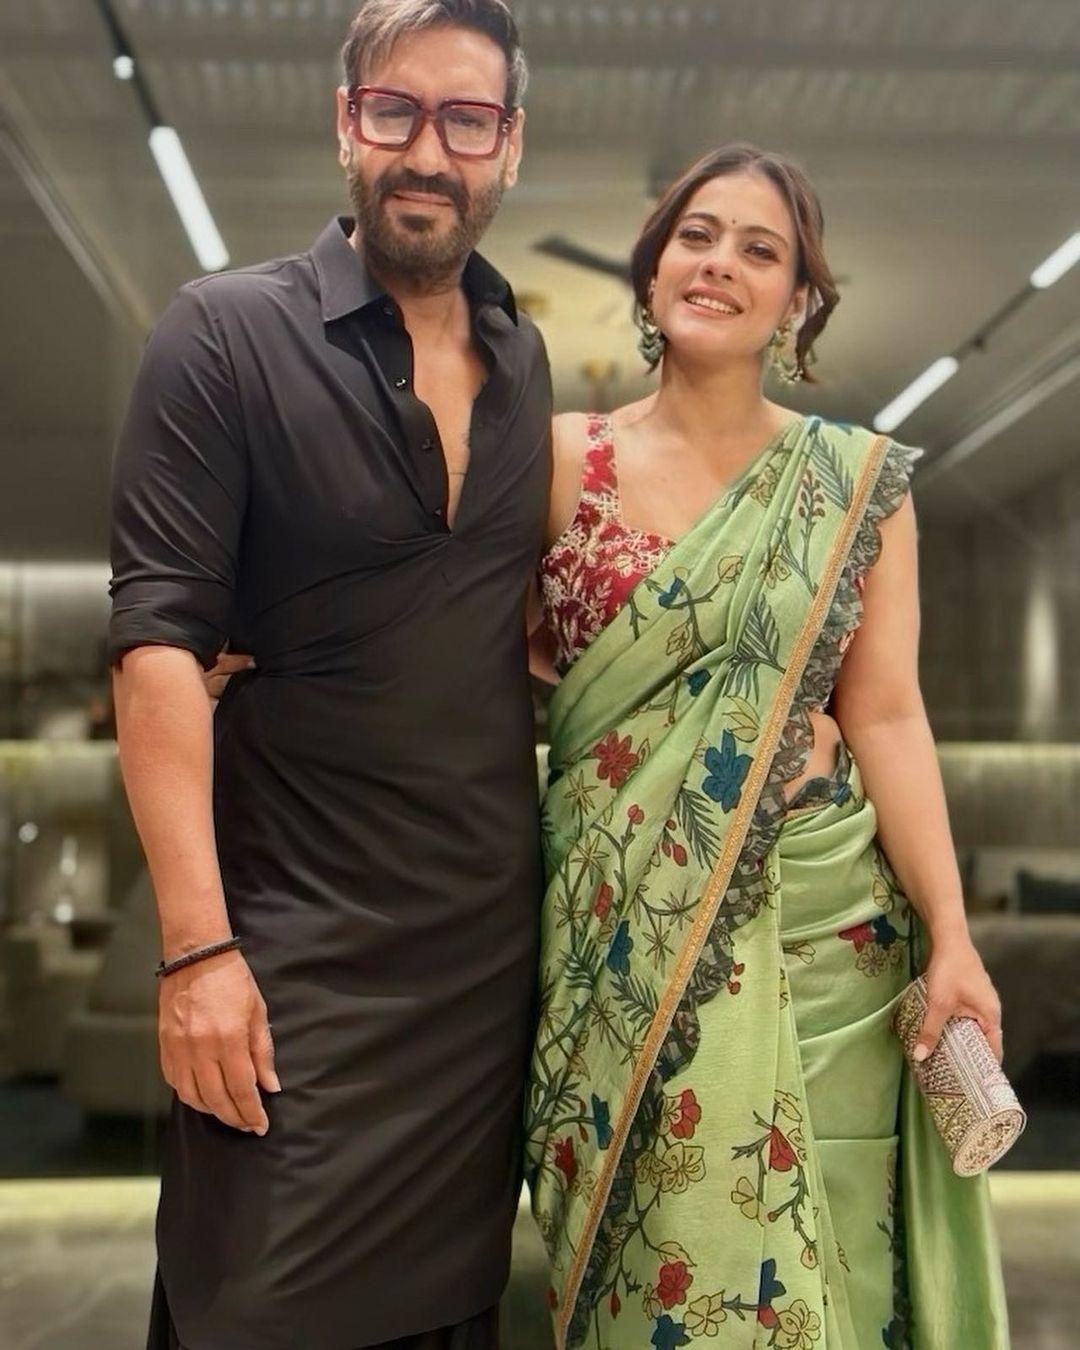 Kajol's life took a beautiful turn when she married Ajay Devgn, and together, they welcomed two wonderful children into their family.